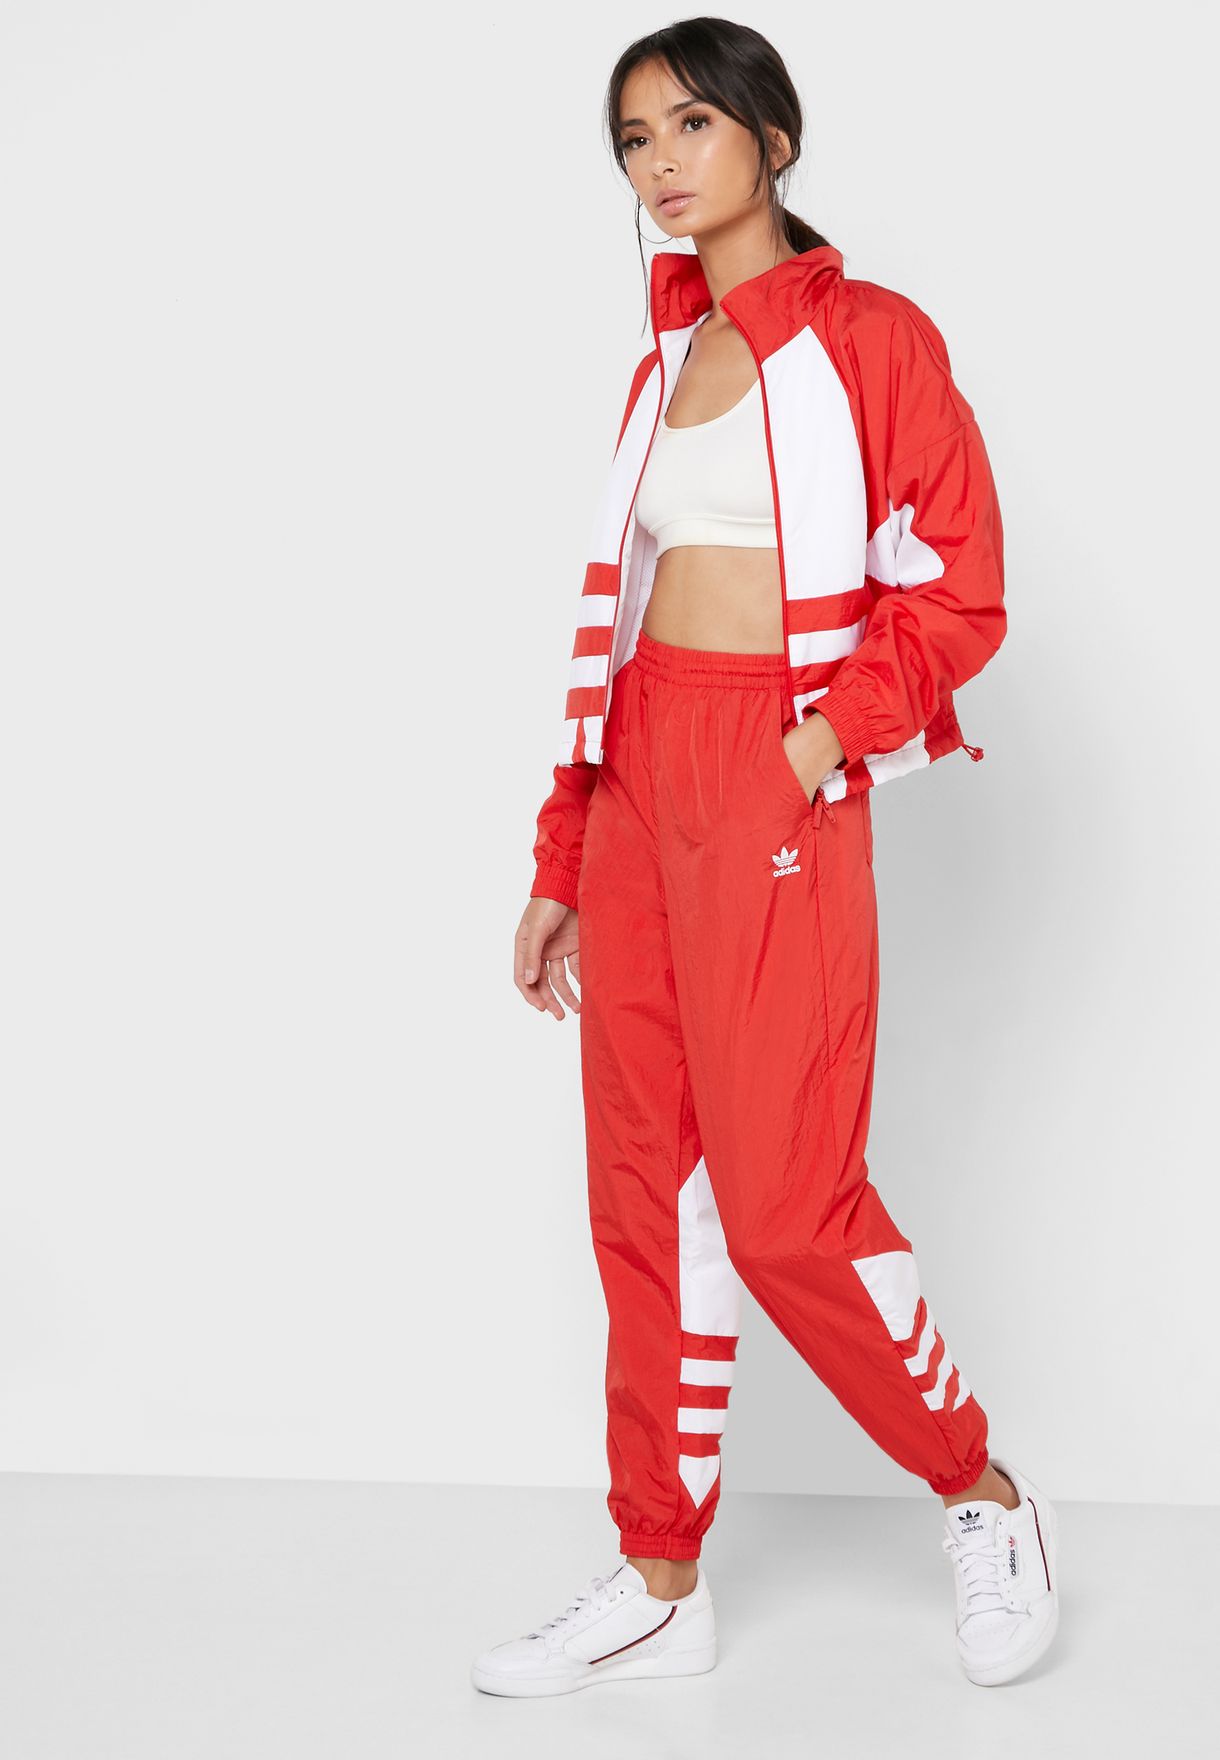 adidas track pants red womens